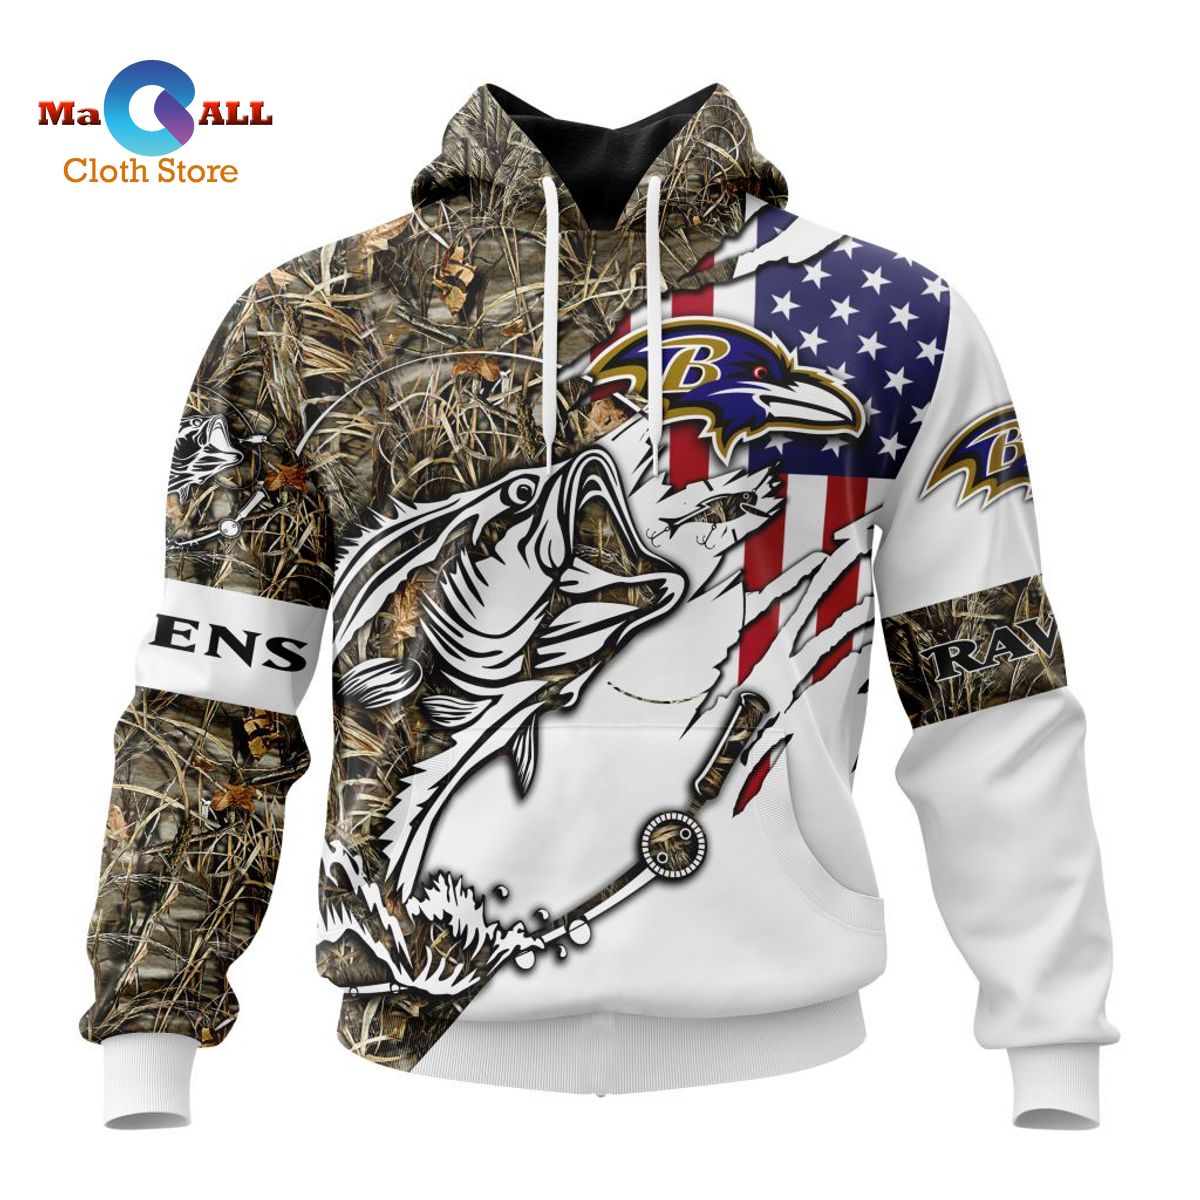 NEW] NFL Baltimore Ravens Special Fishing With Flag Of The United States  ST2201 - Macall Cloth Store - Destination for fashionistas